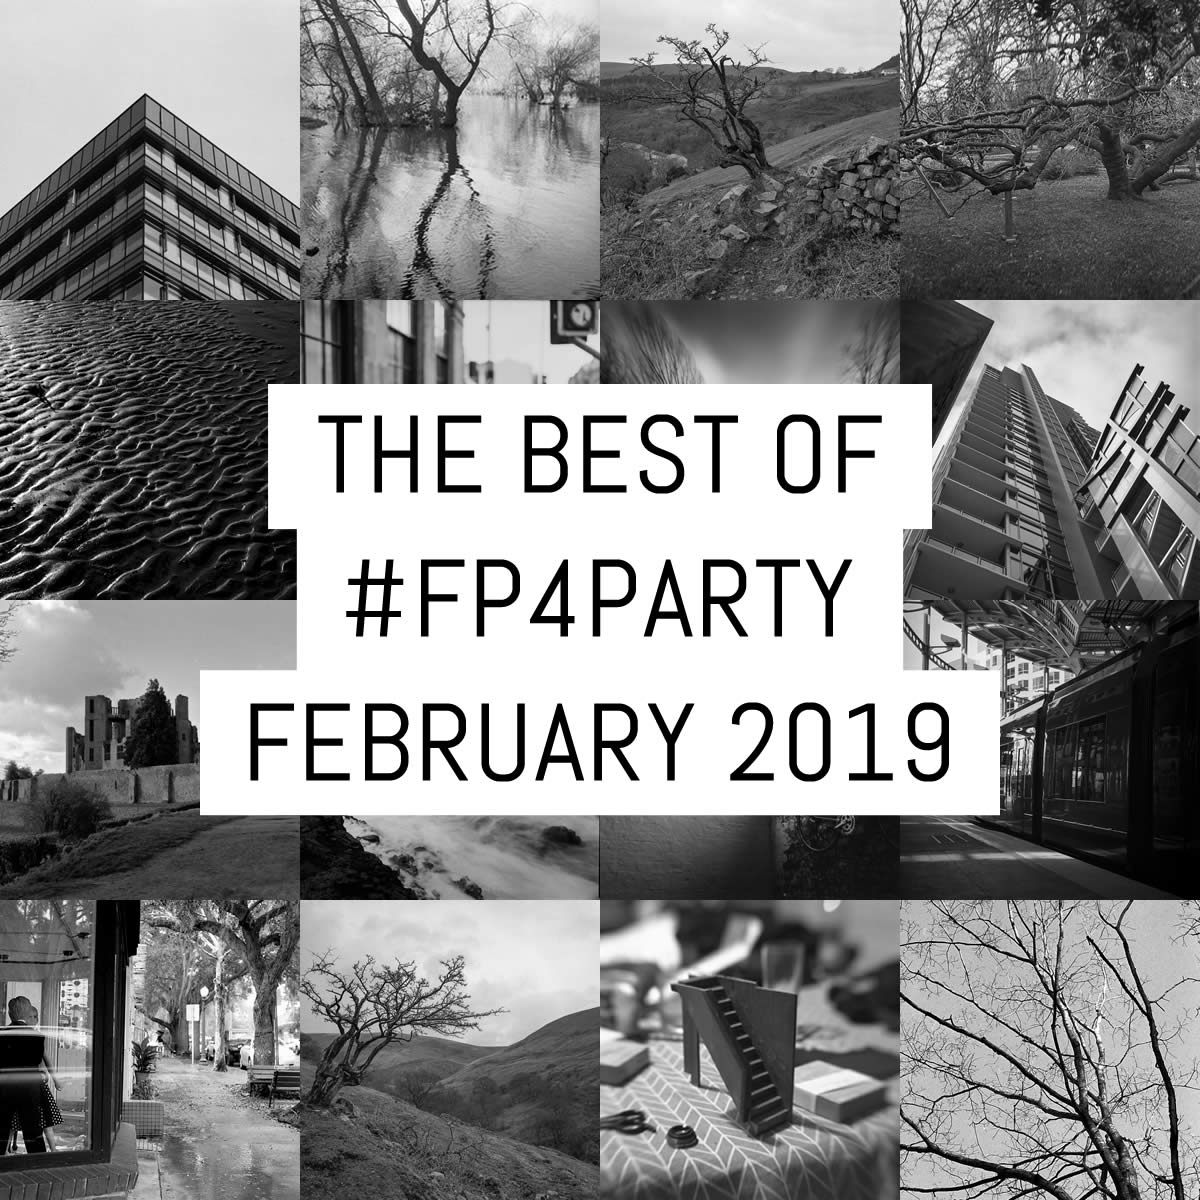 The best of #FP4party February 2019